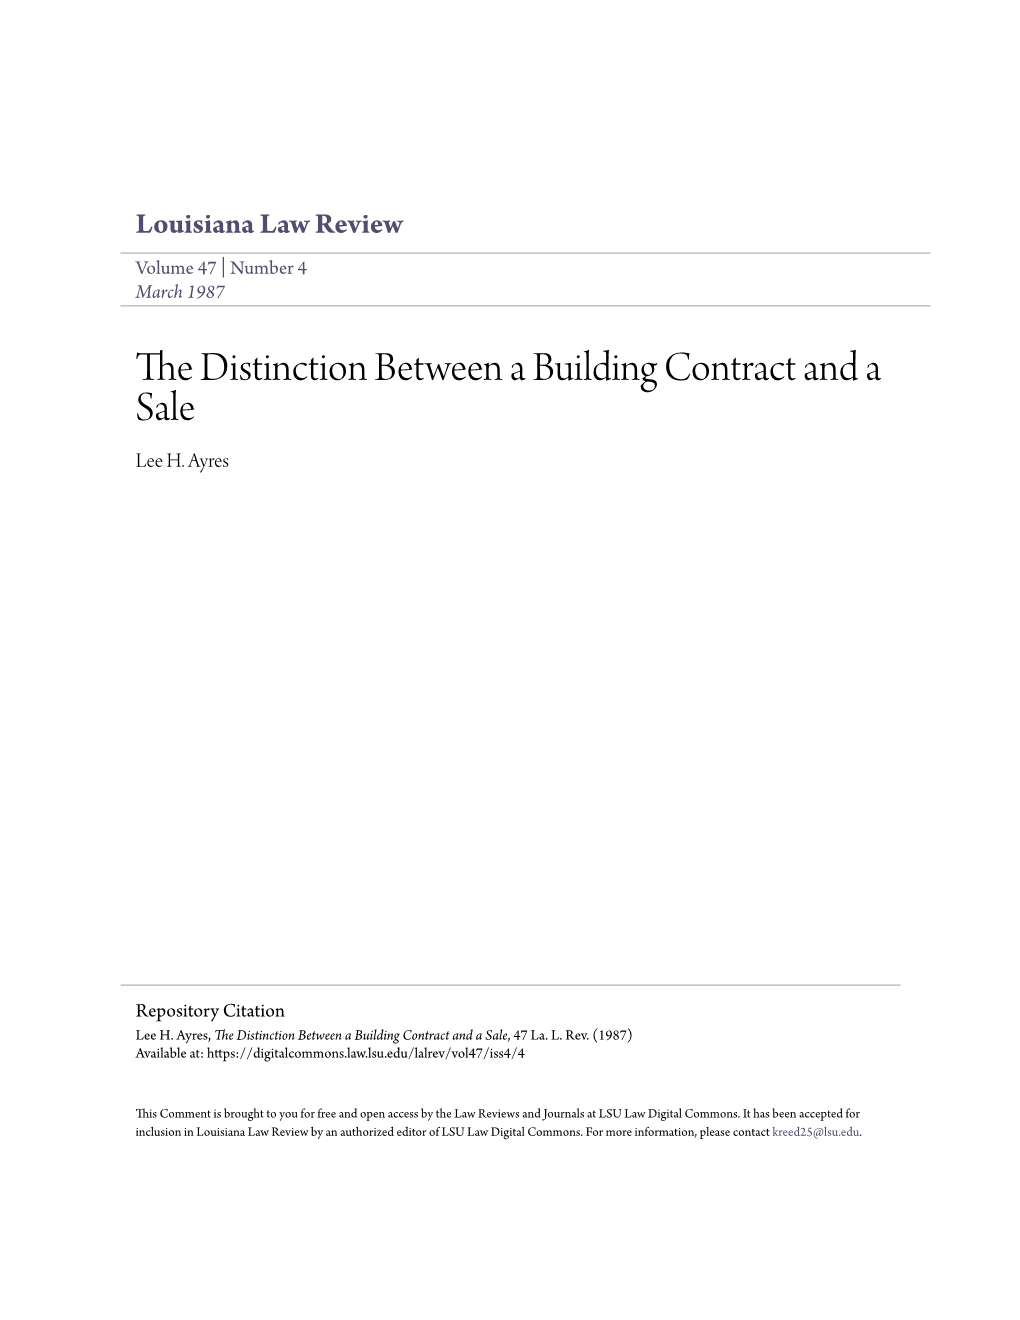 The Distinction Between a Building Contract and a Sale Lee H